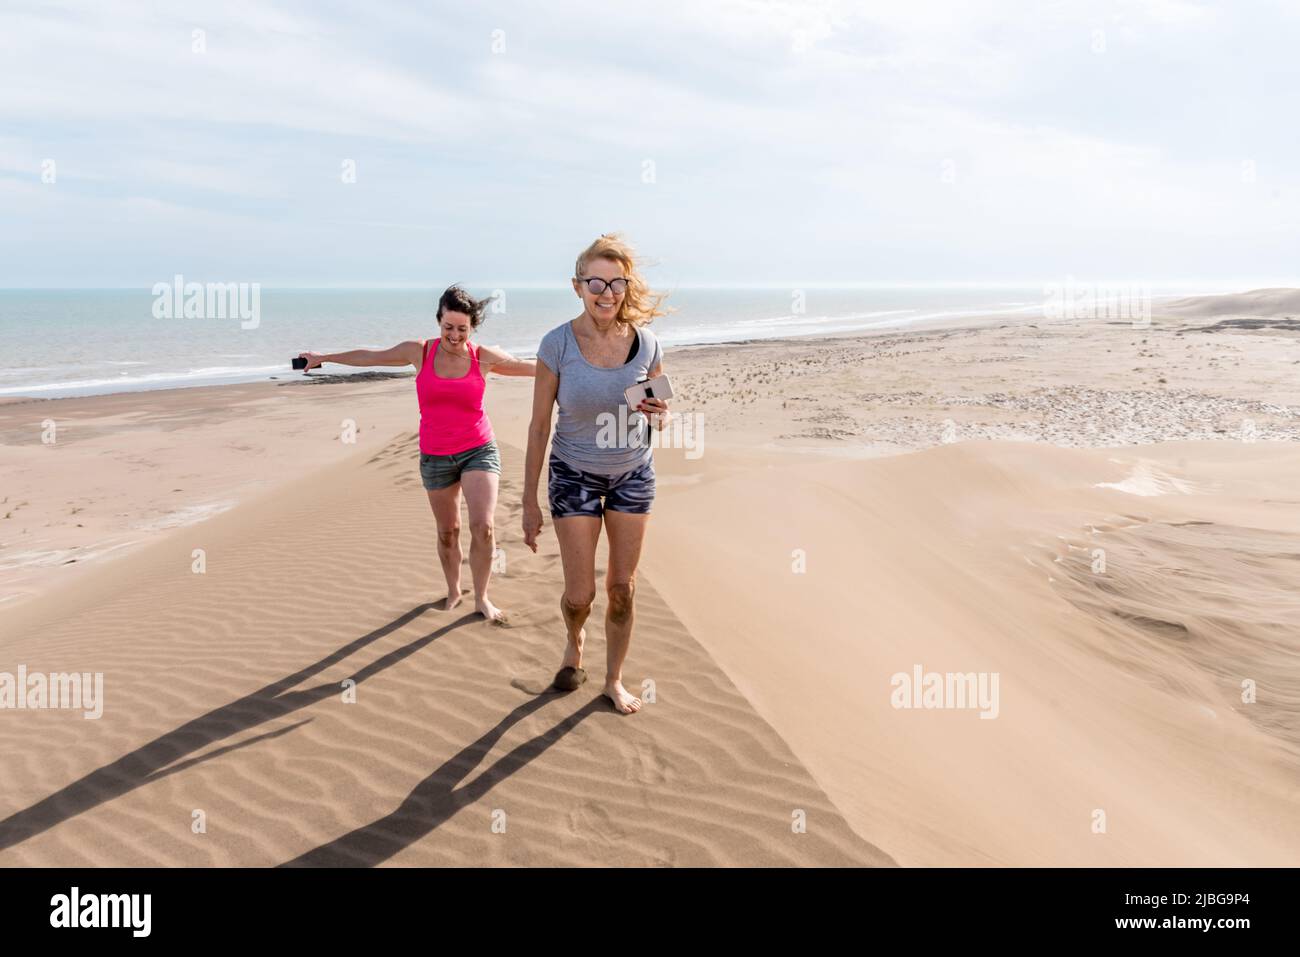 Front view of two women walking on top of a large dune, one of them with arms open to the wind. Mother and daughter Stock Photo